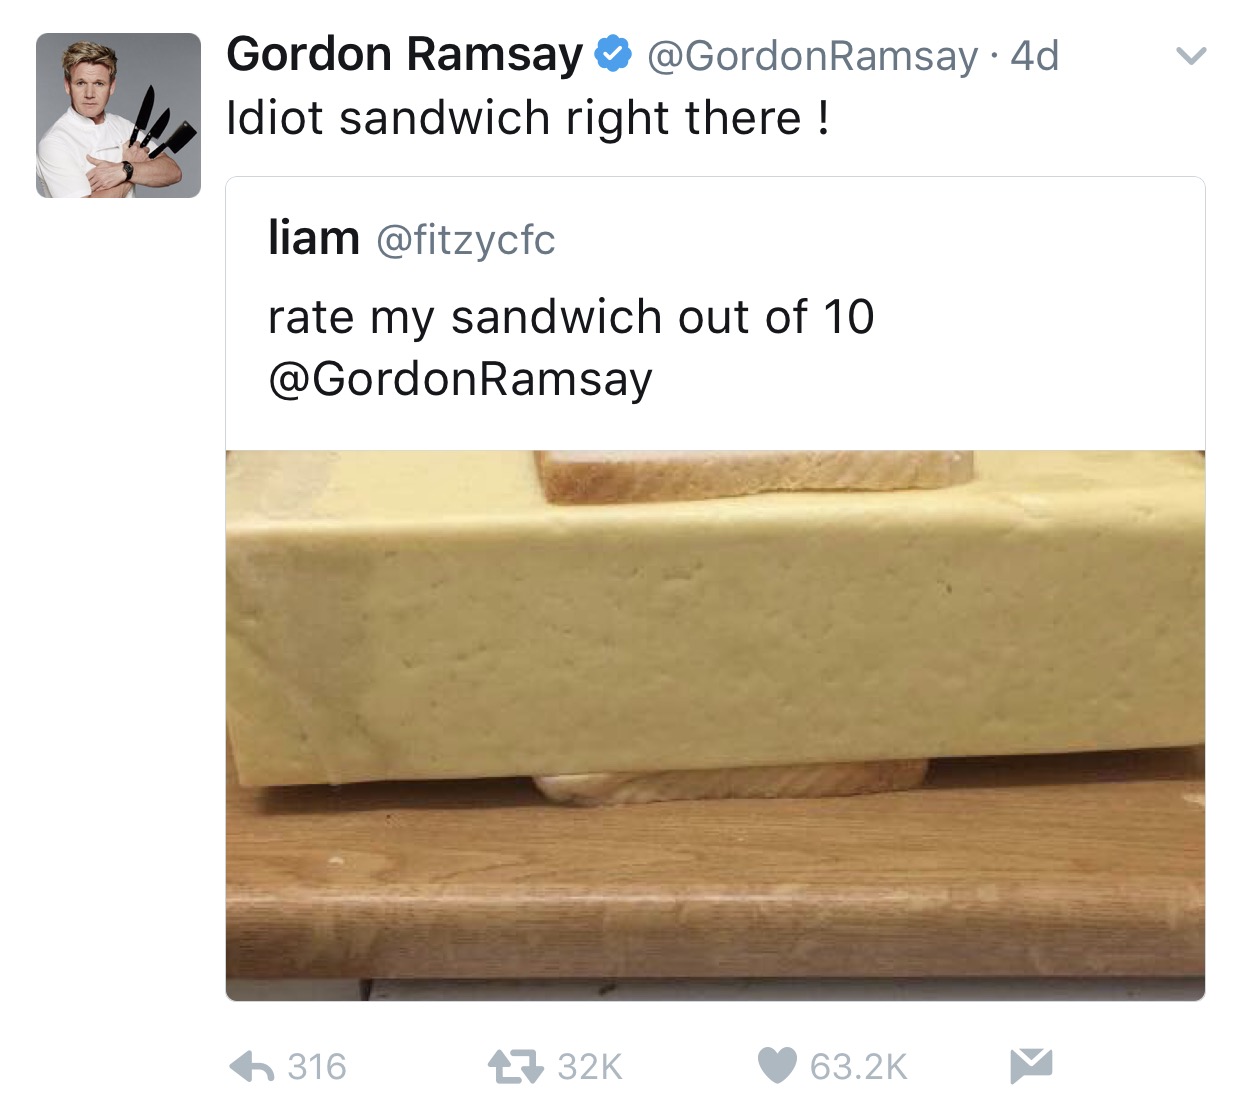 tweet - gordon ramsay tweets - Gordon Ramsay Ramsay 4d Idiot sandwich right there! liam rate my sandwich out of 10 Ramsay 6 316